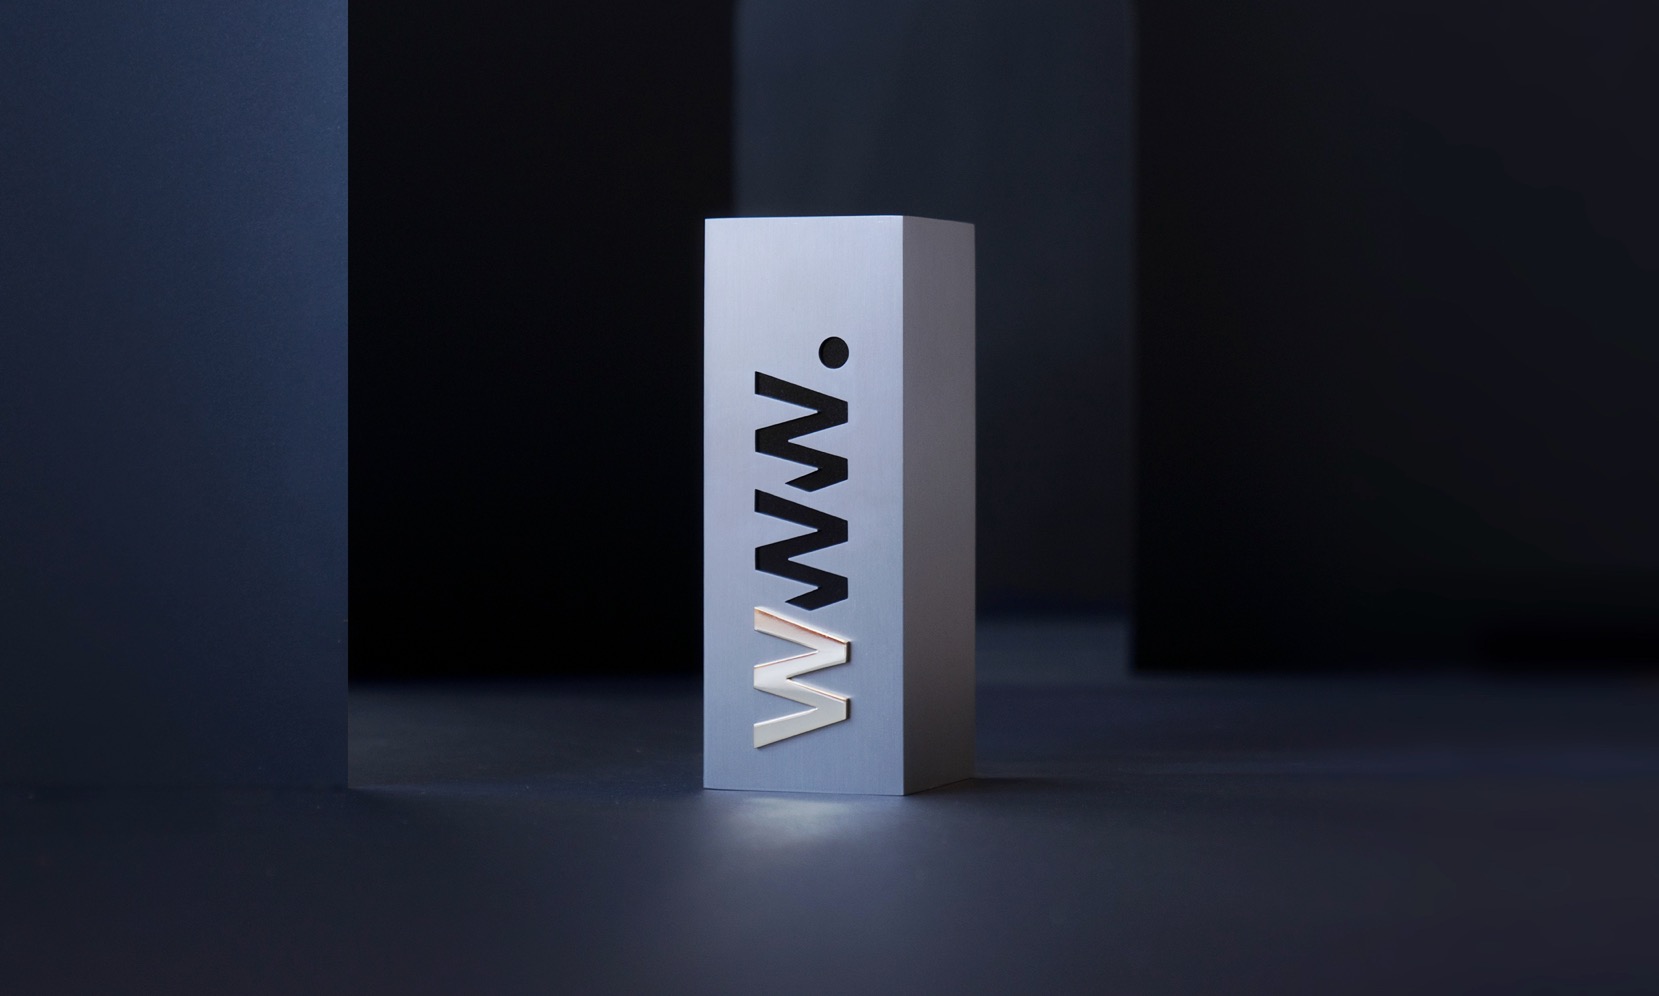 Fleava is nominated as the 2020 Agency of the Year on Awwwards.